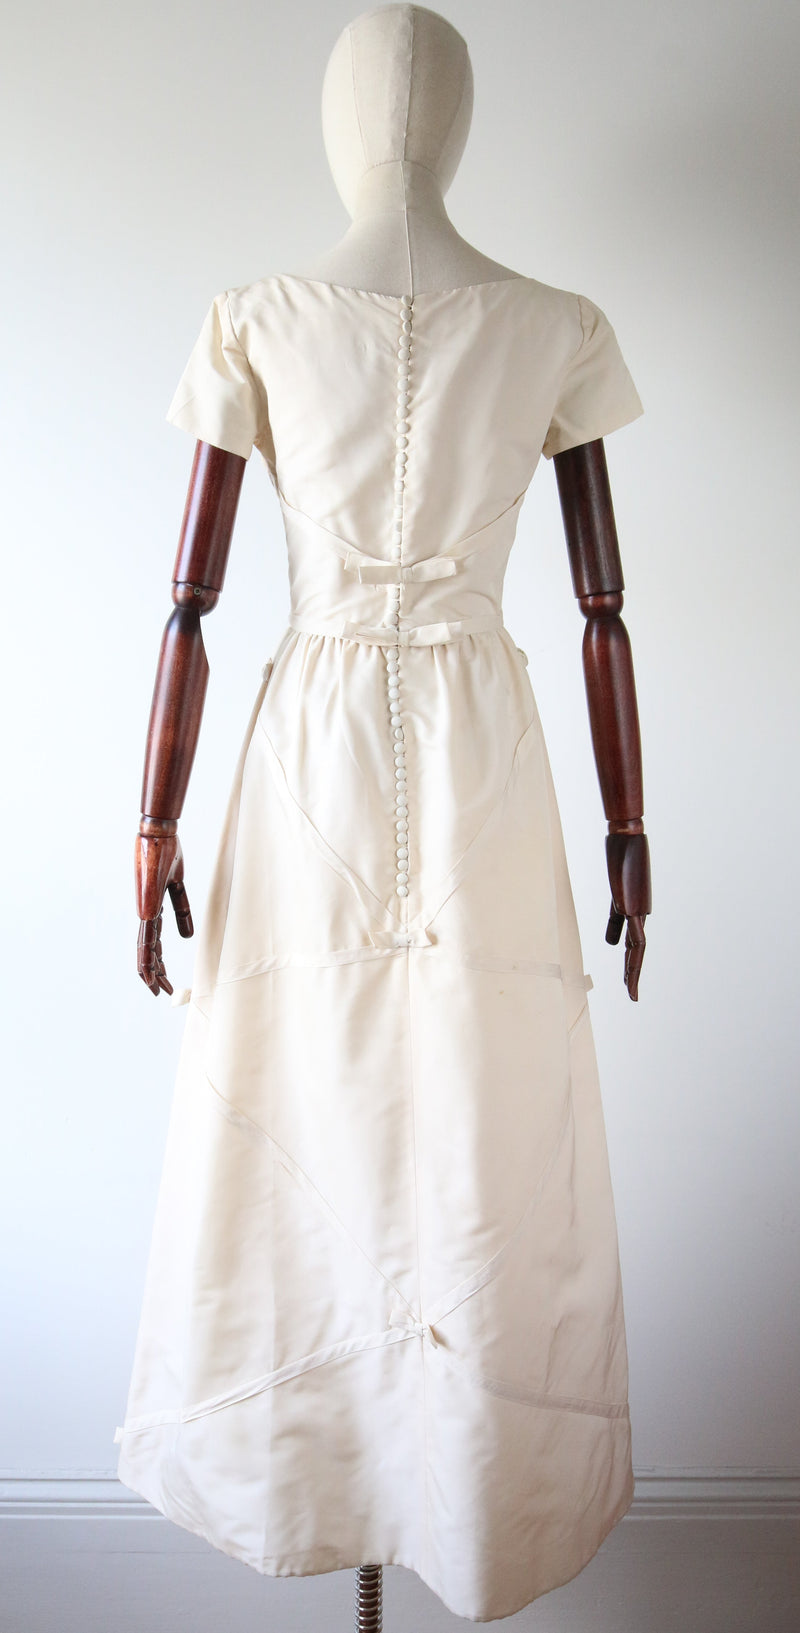 "Bows & Buttons" Vintage 1950's Cream Bow & Button Back Evening Dress UK 8 US 4